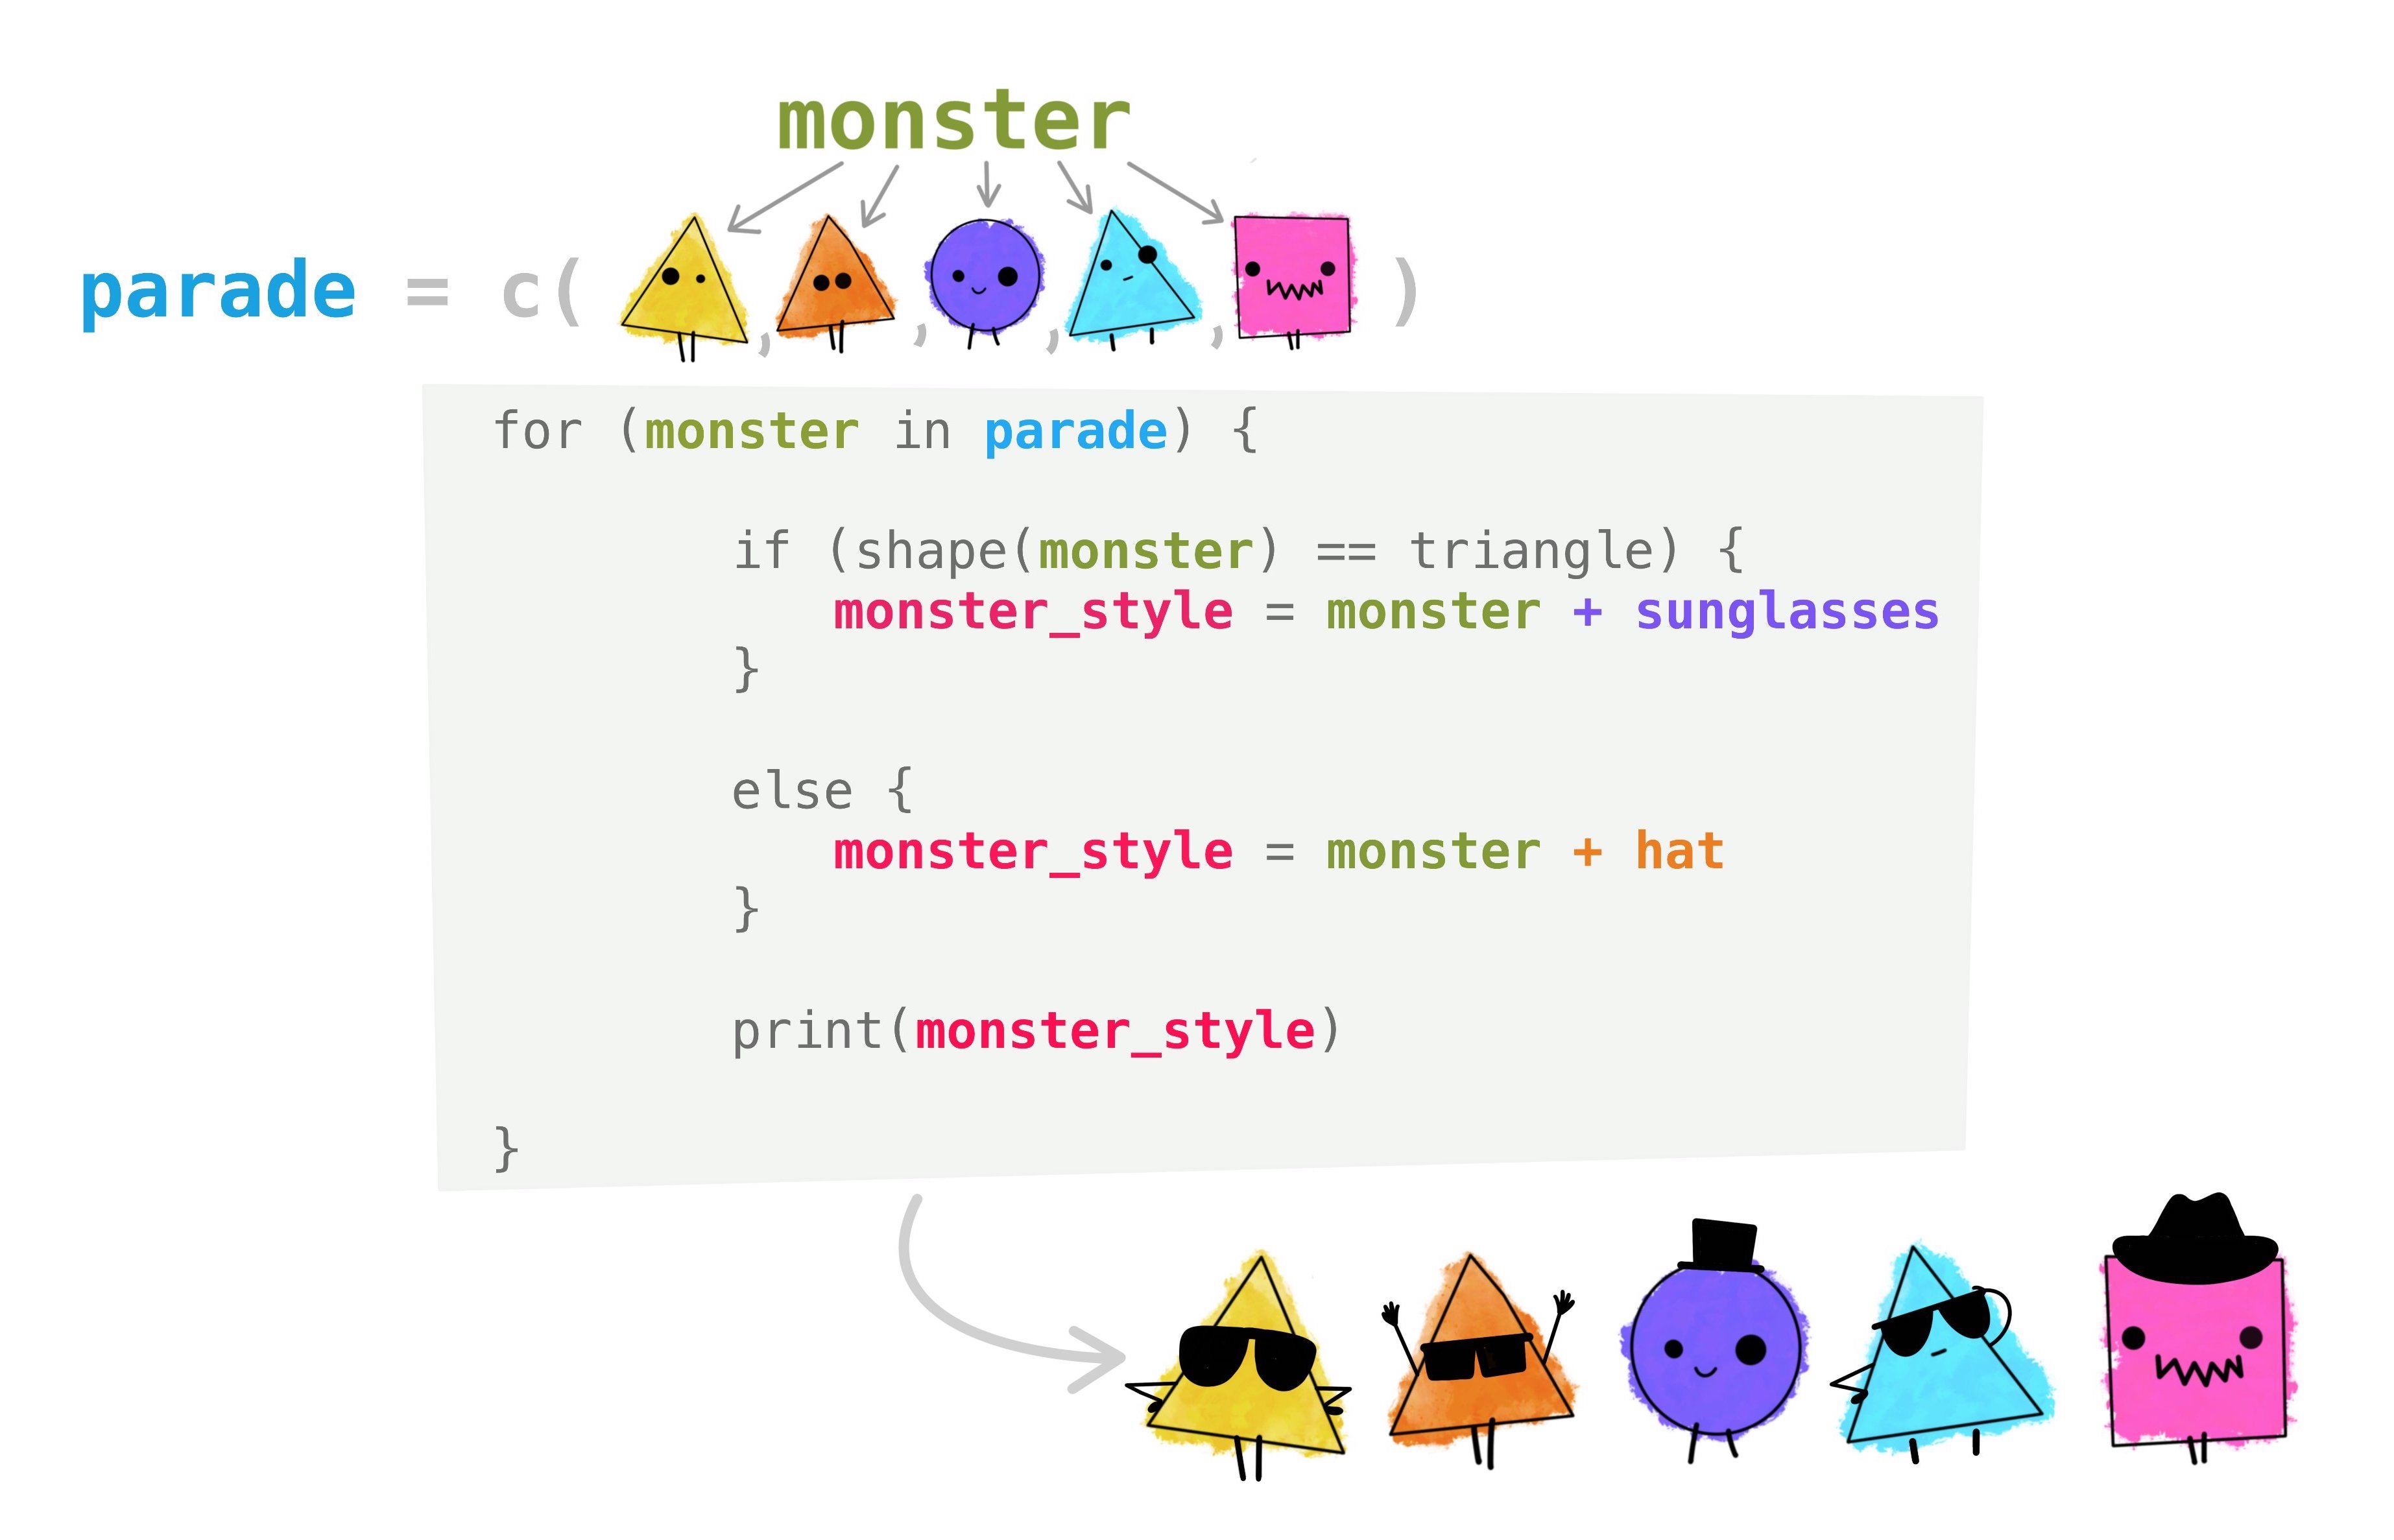 Comic showing a loop across a set of monster shapes where triangle creatures get sunglasses but non-triangles get a hat because of an 'if' and 'else' use in the loop